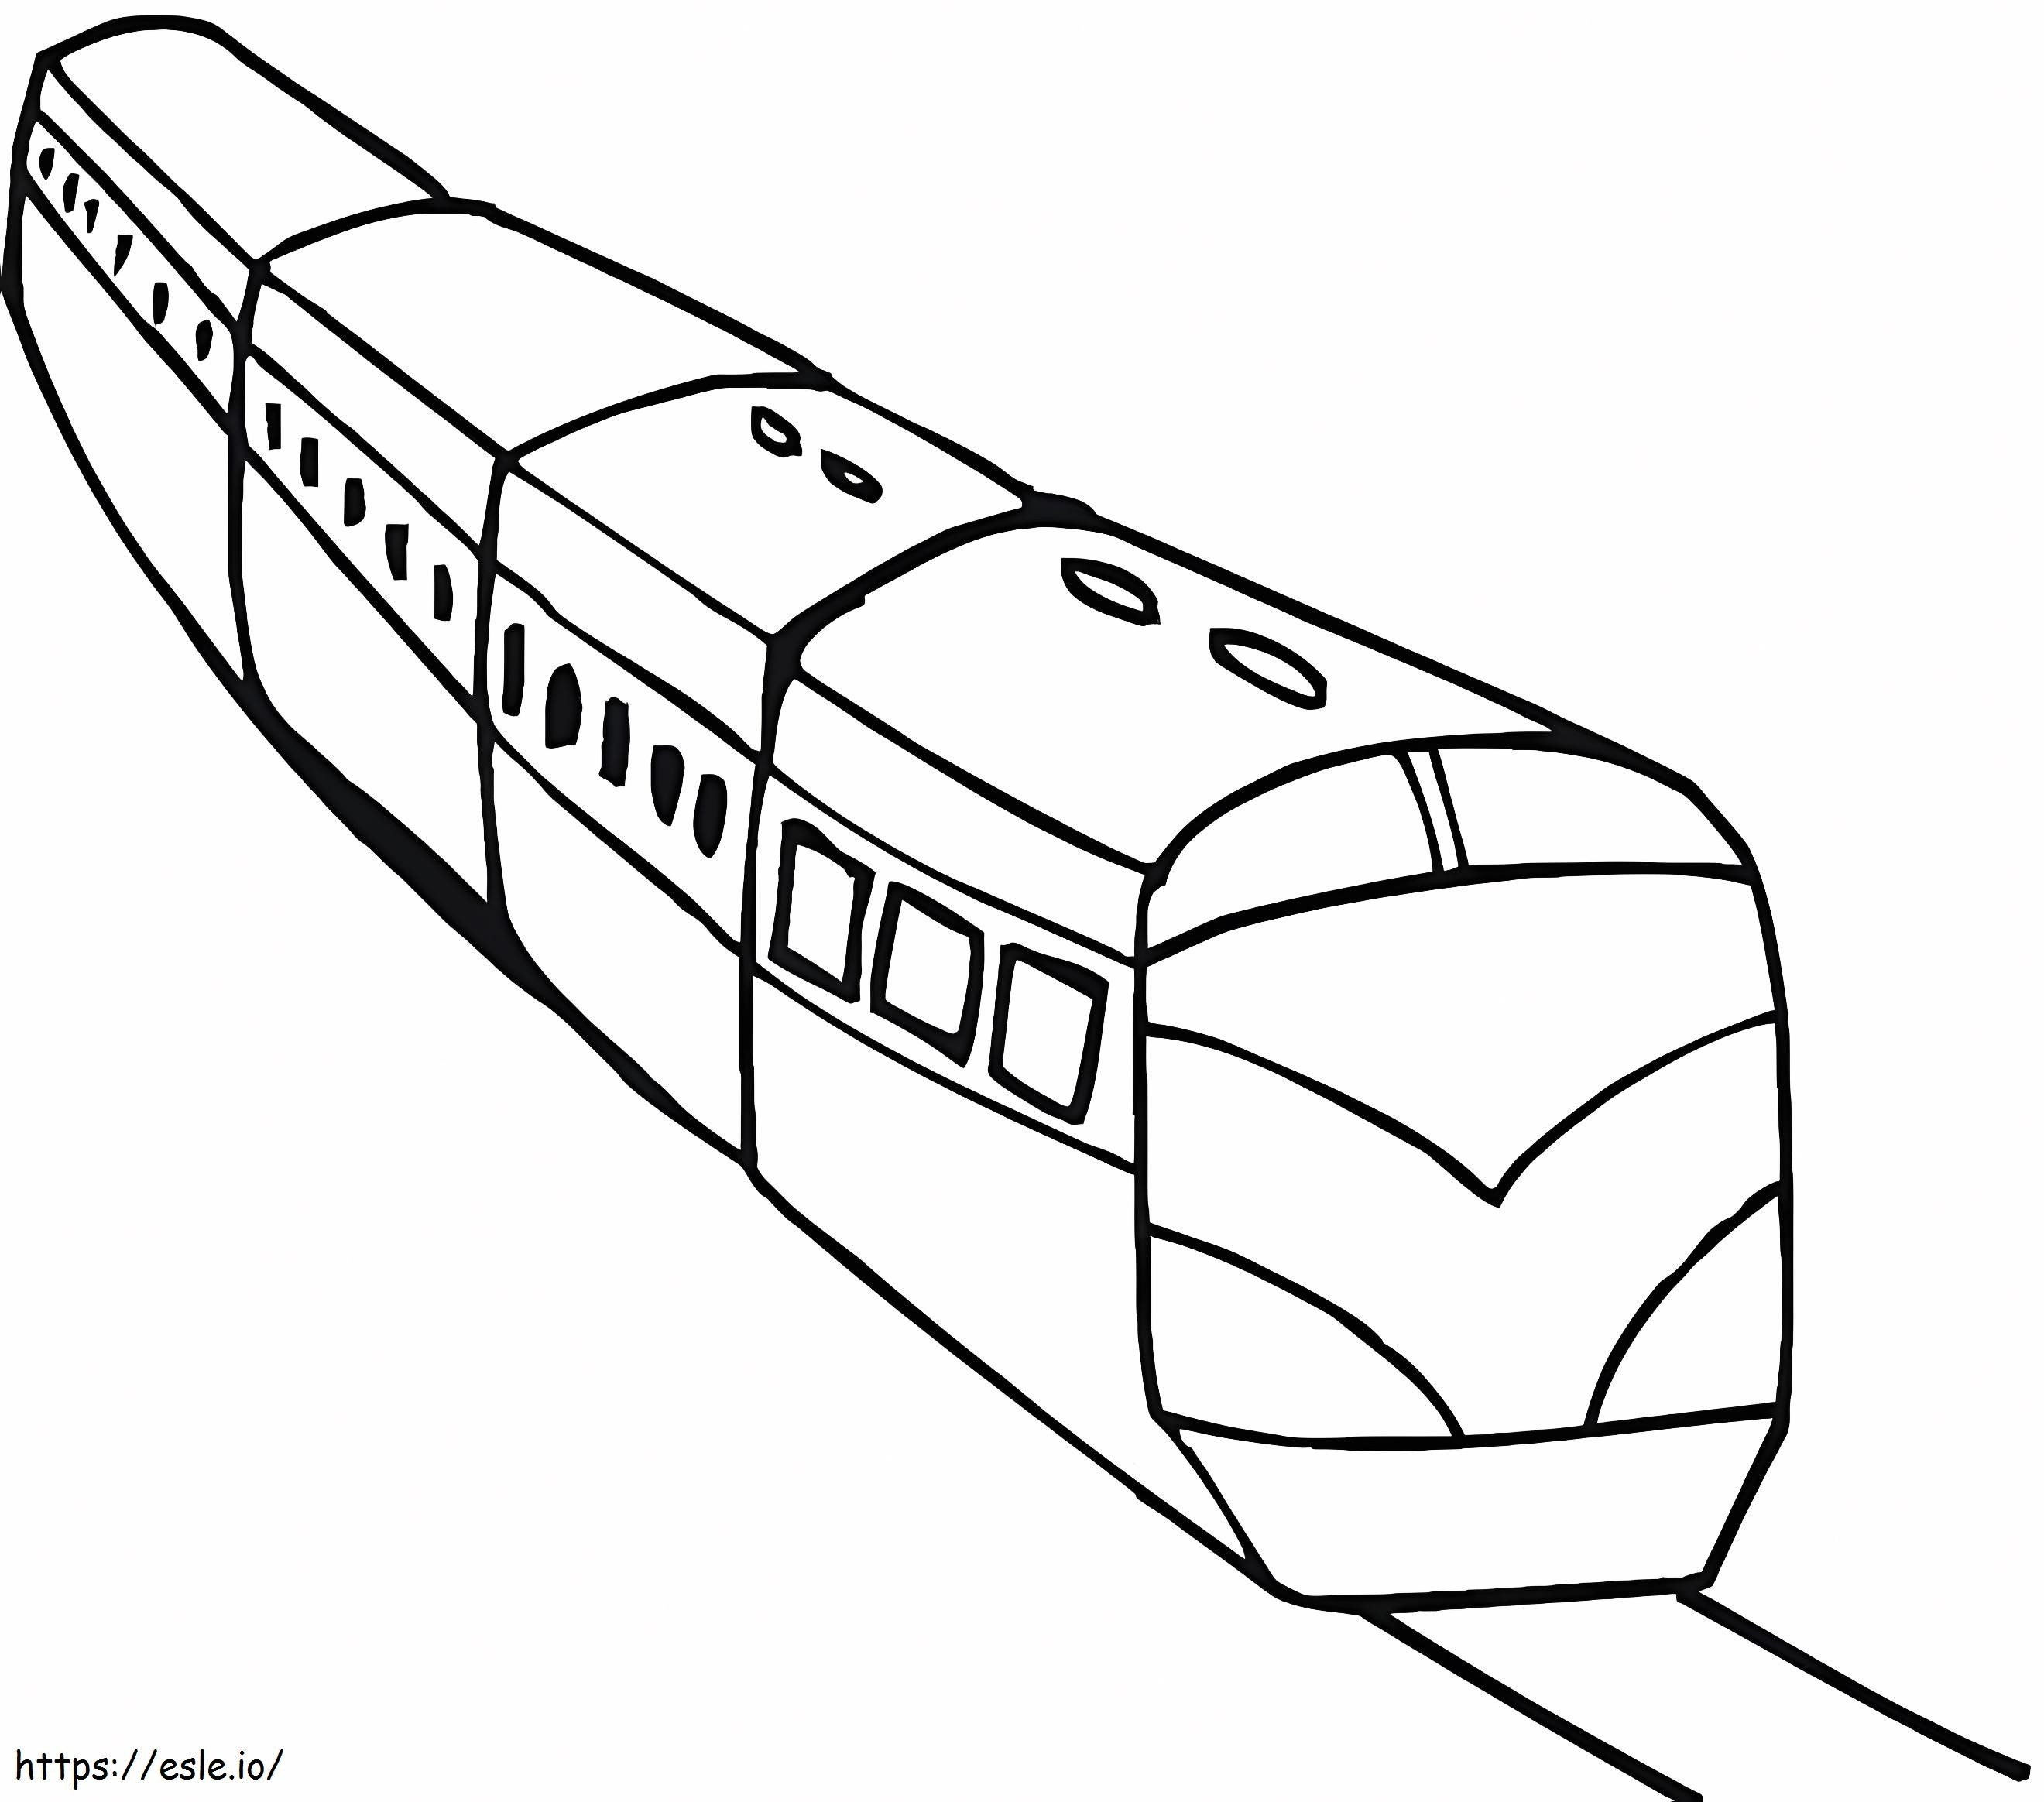 Train 5 coloring page